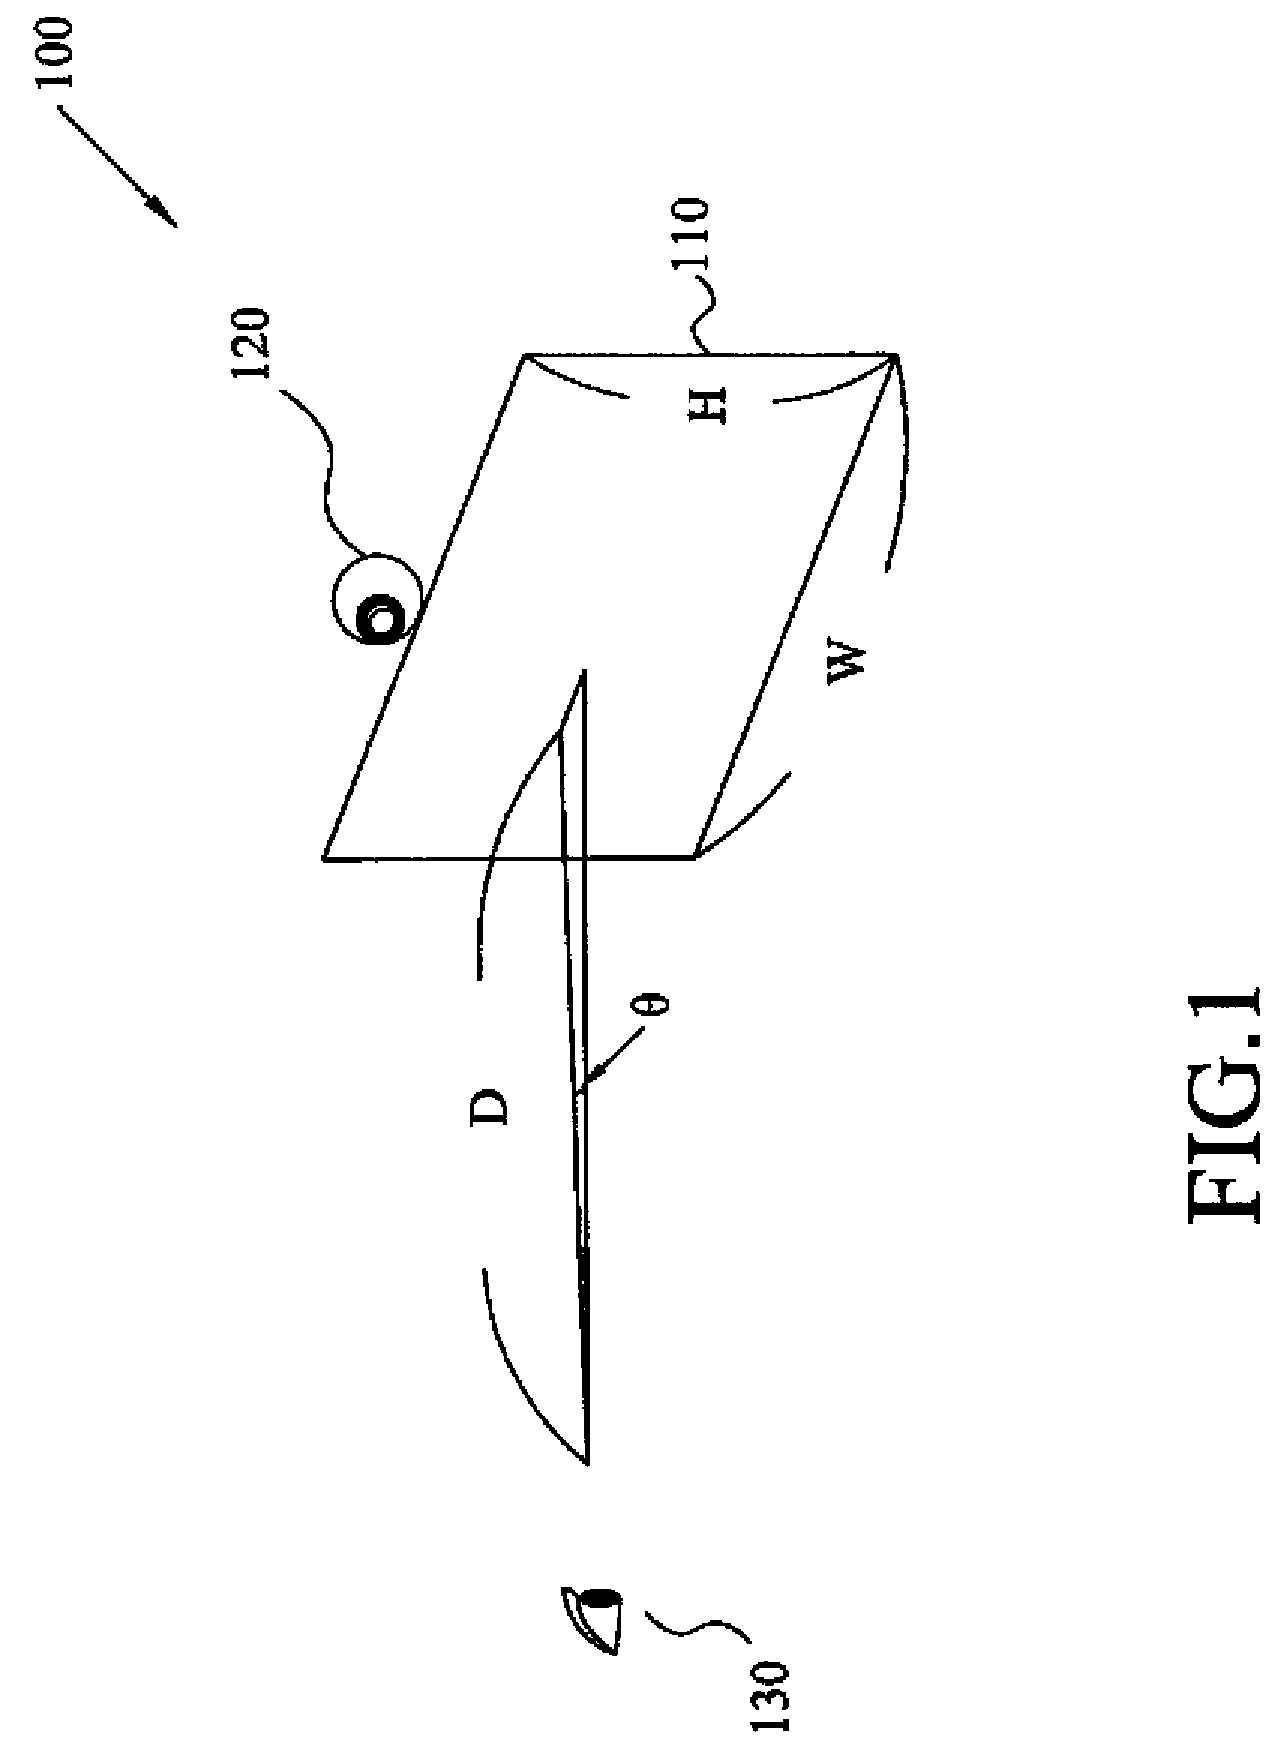 System and method for automatically adjusting visual setting of display device